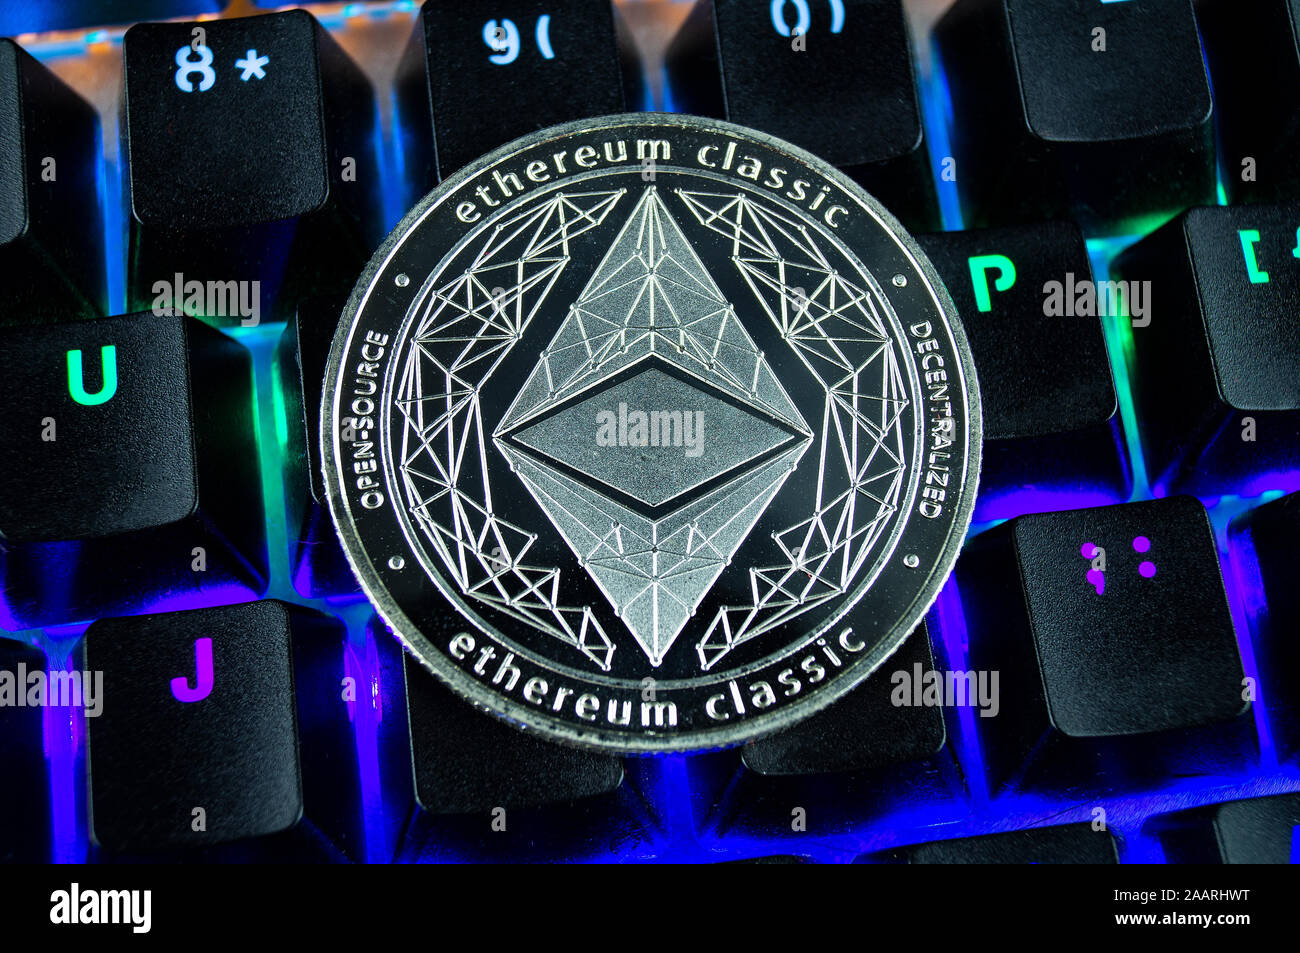 Coin cryptocurrency ethereum classic close-up of the colour-coded keyboard background Stock Photo